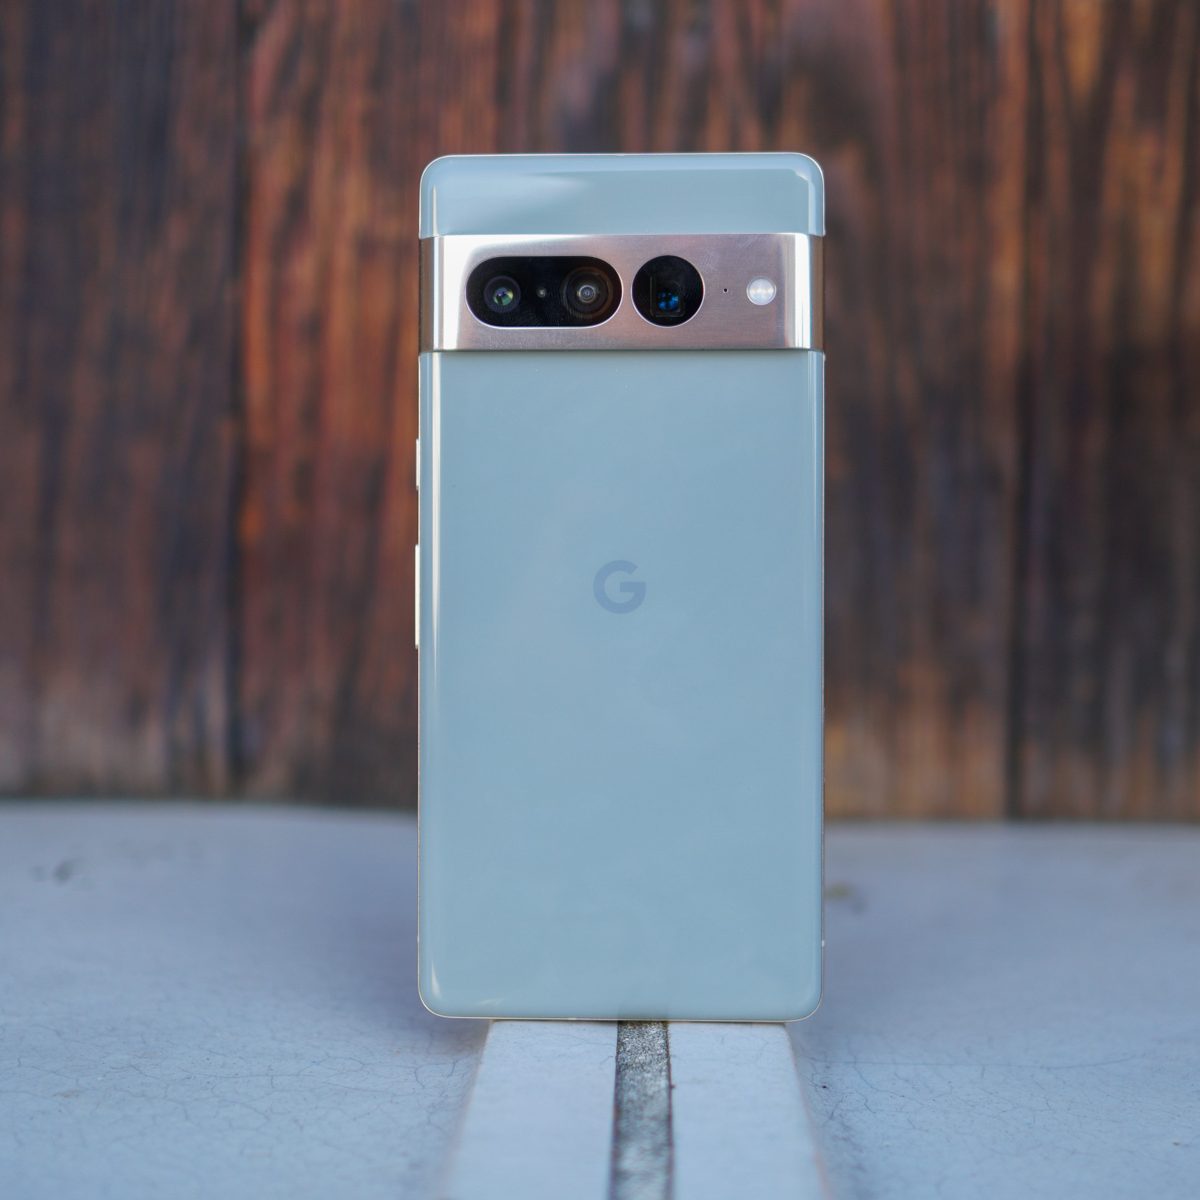 Google Pixel 2 review: Function over form